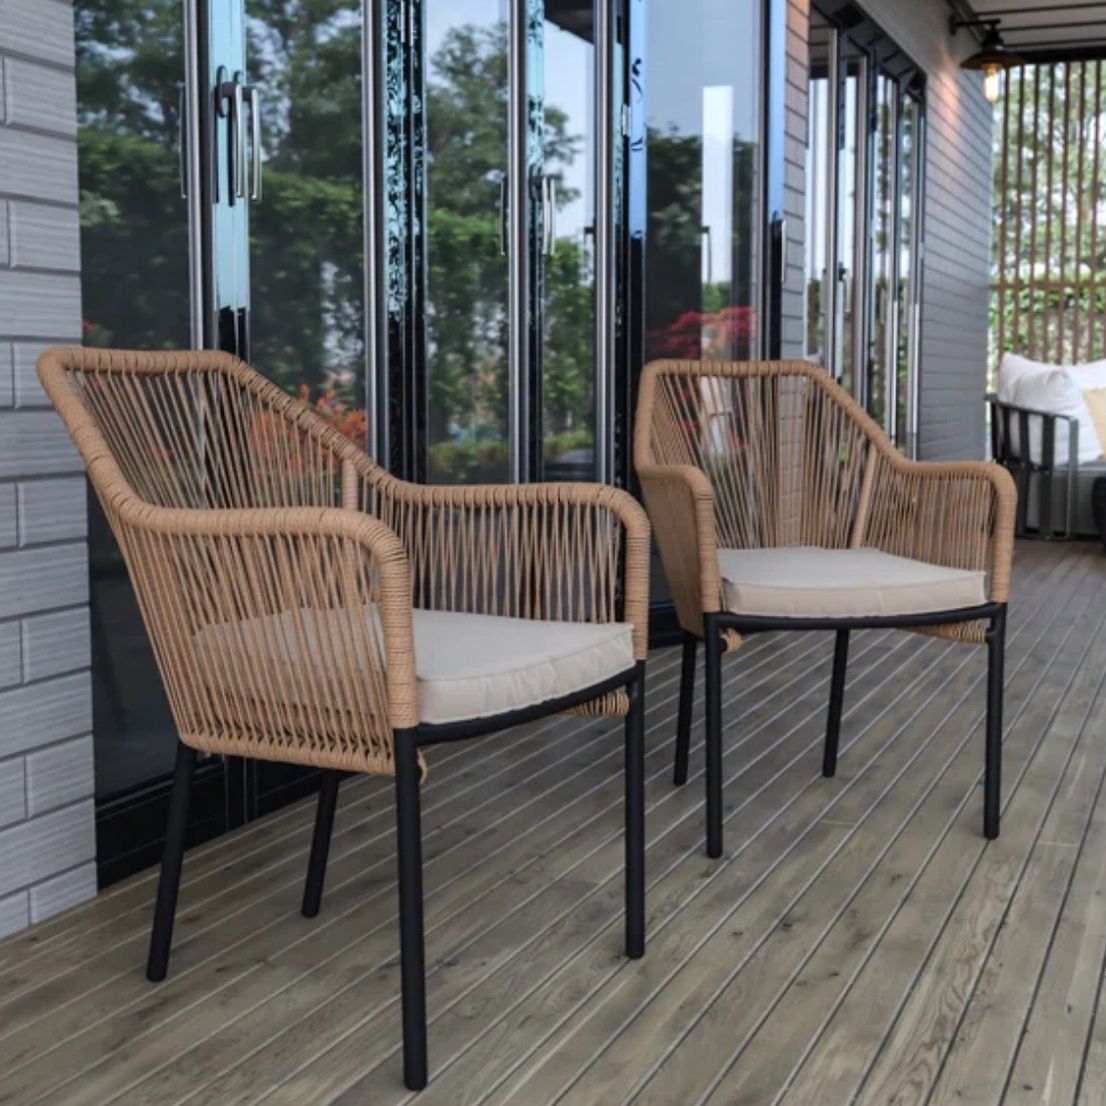 Avarti Woven Outdoor Chairs